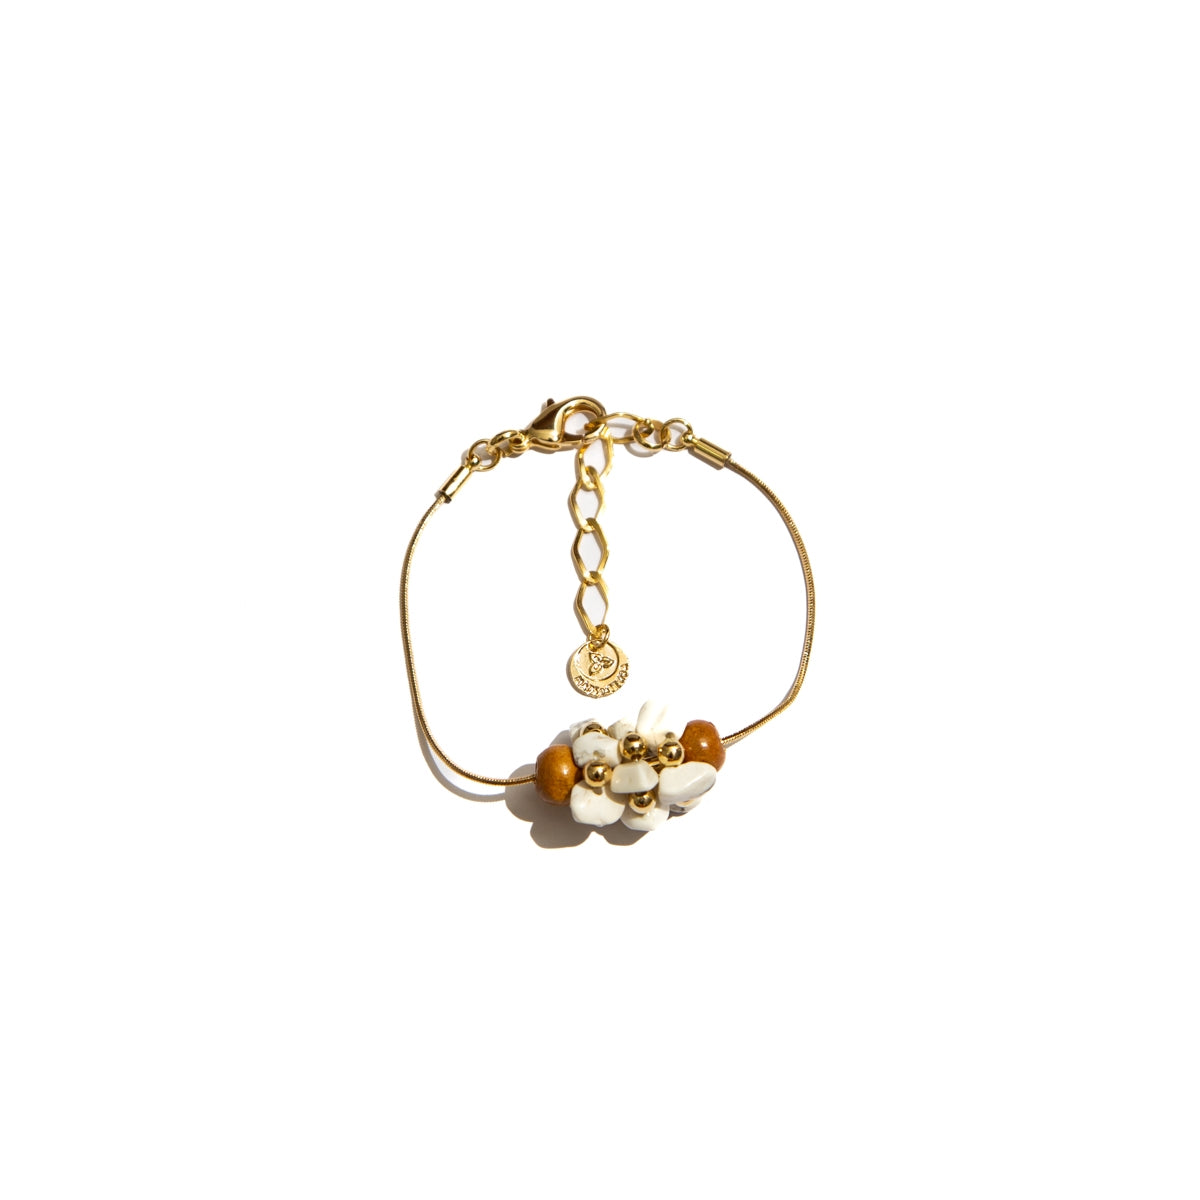 Natalia bracelet with stones, wooden beads, and metals plated in gold